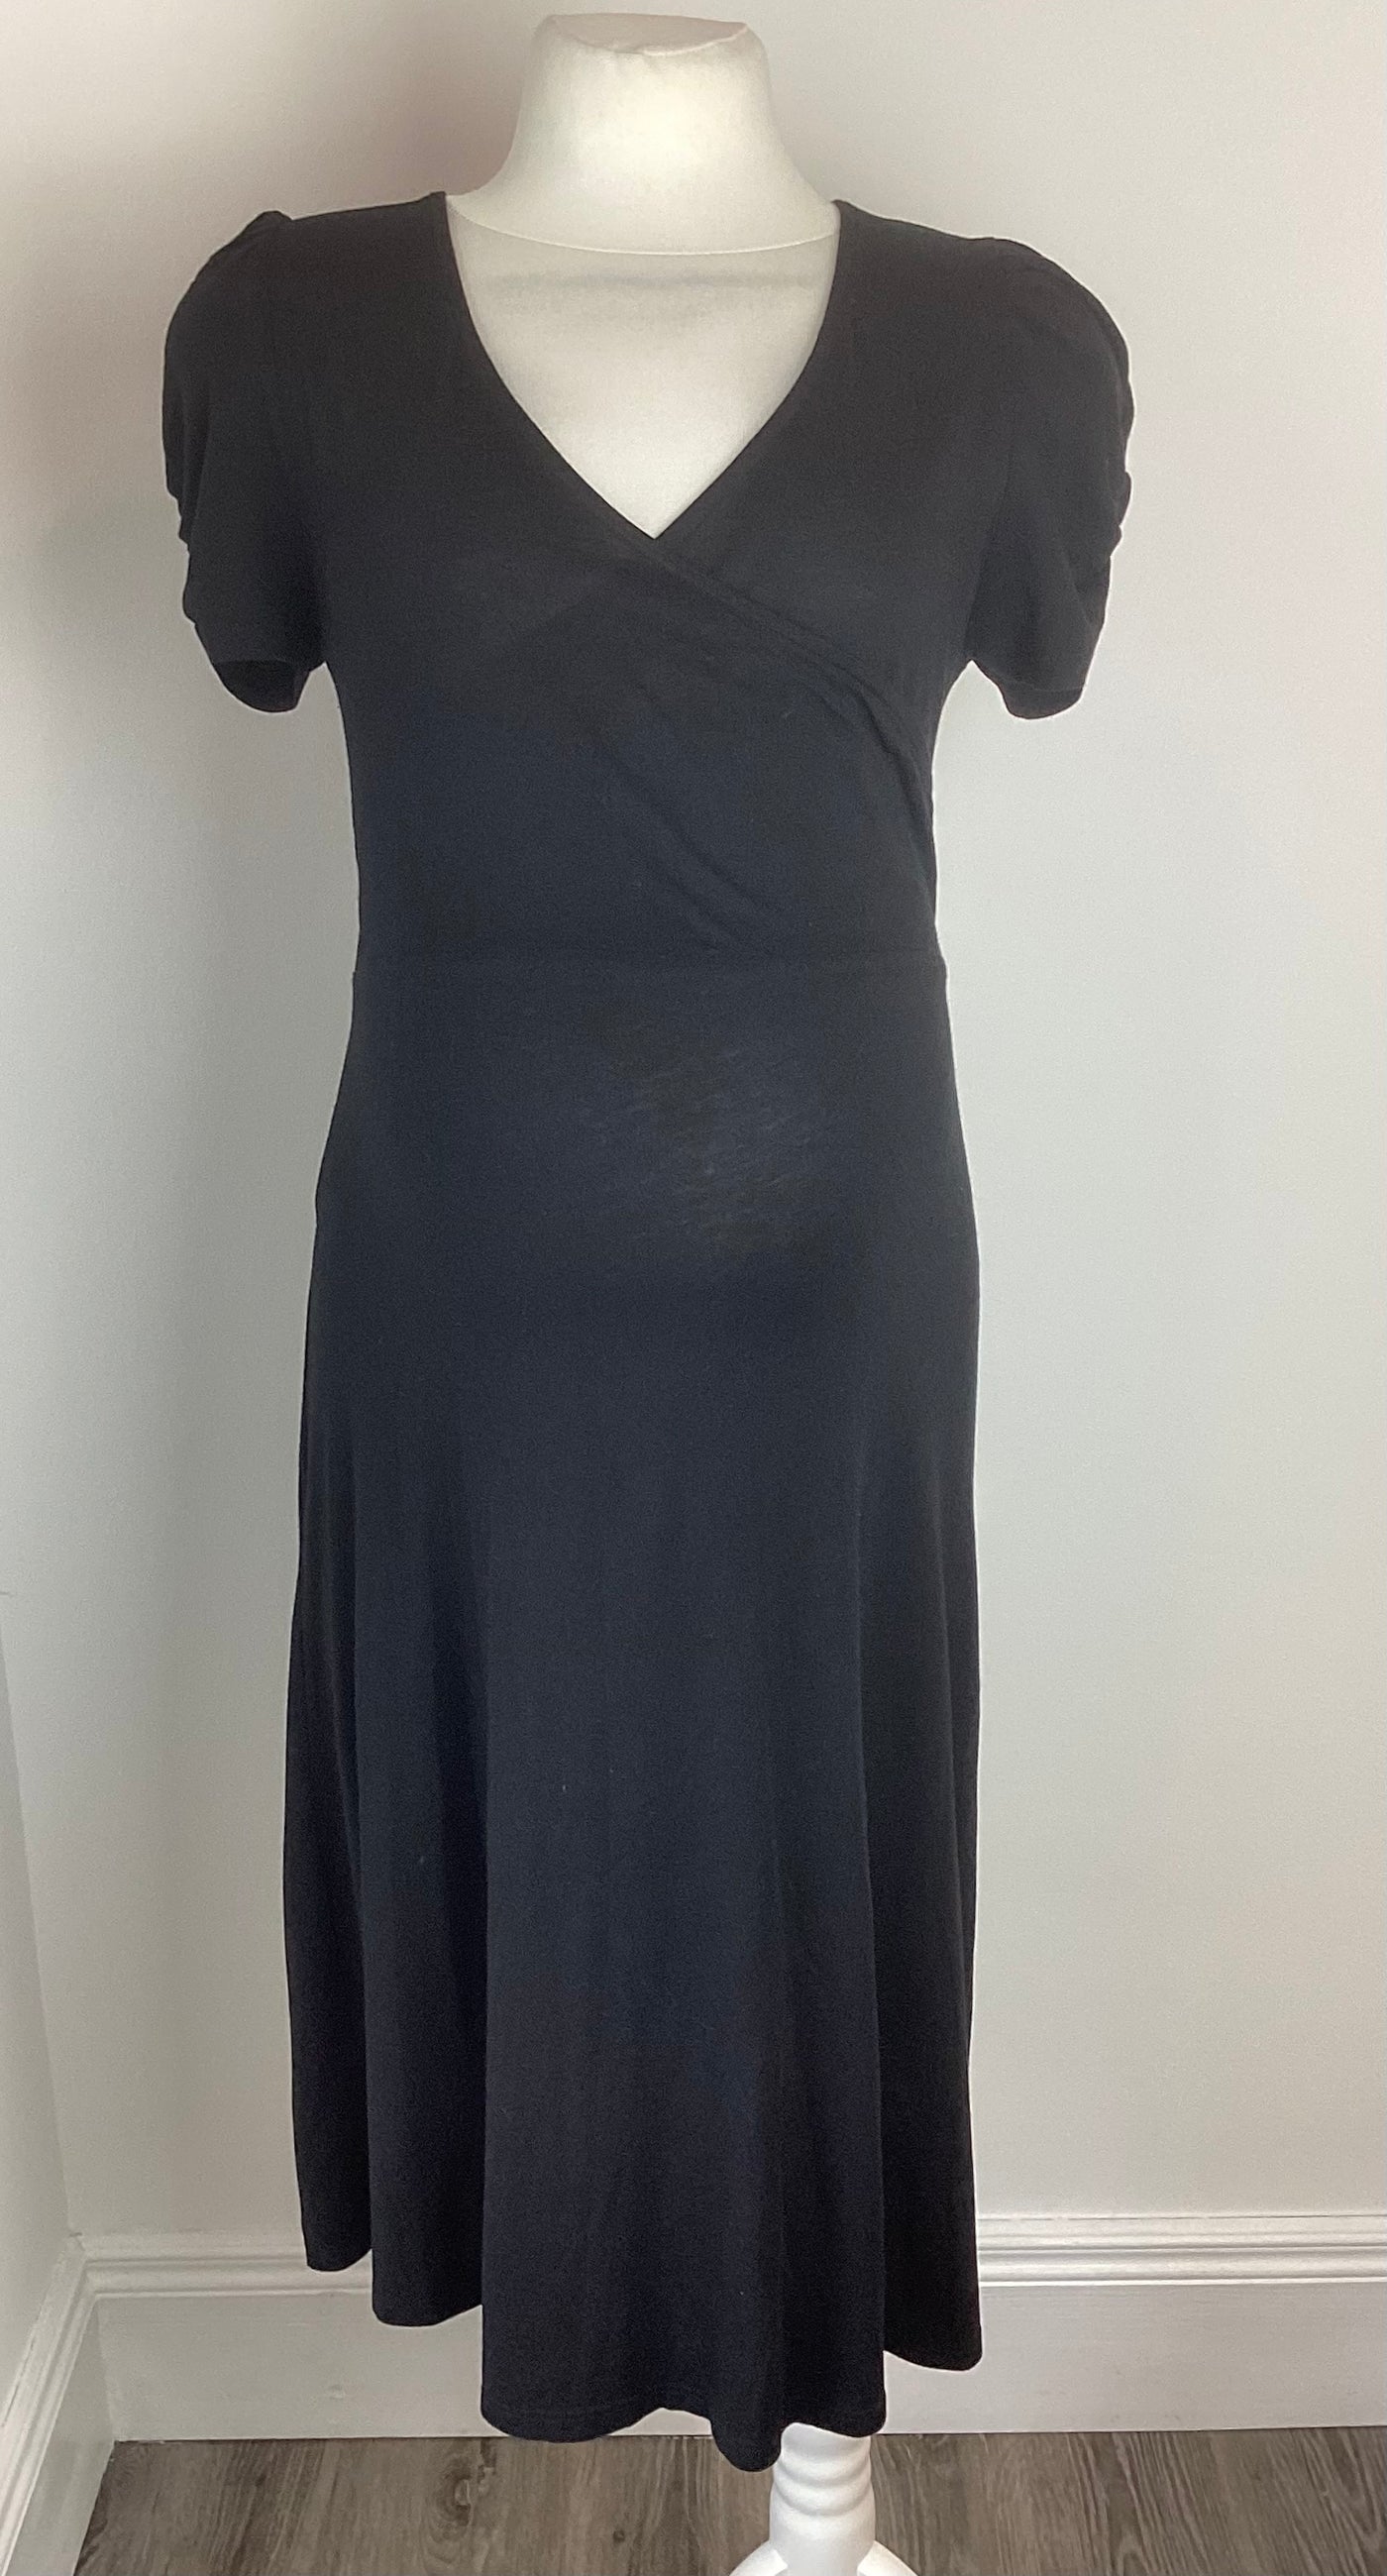 New Look Maternity black short sleeve stretch dress with crossover front - Size 10